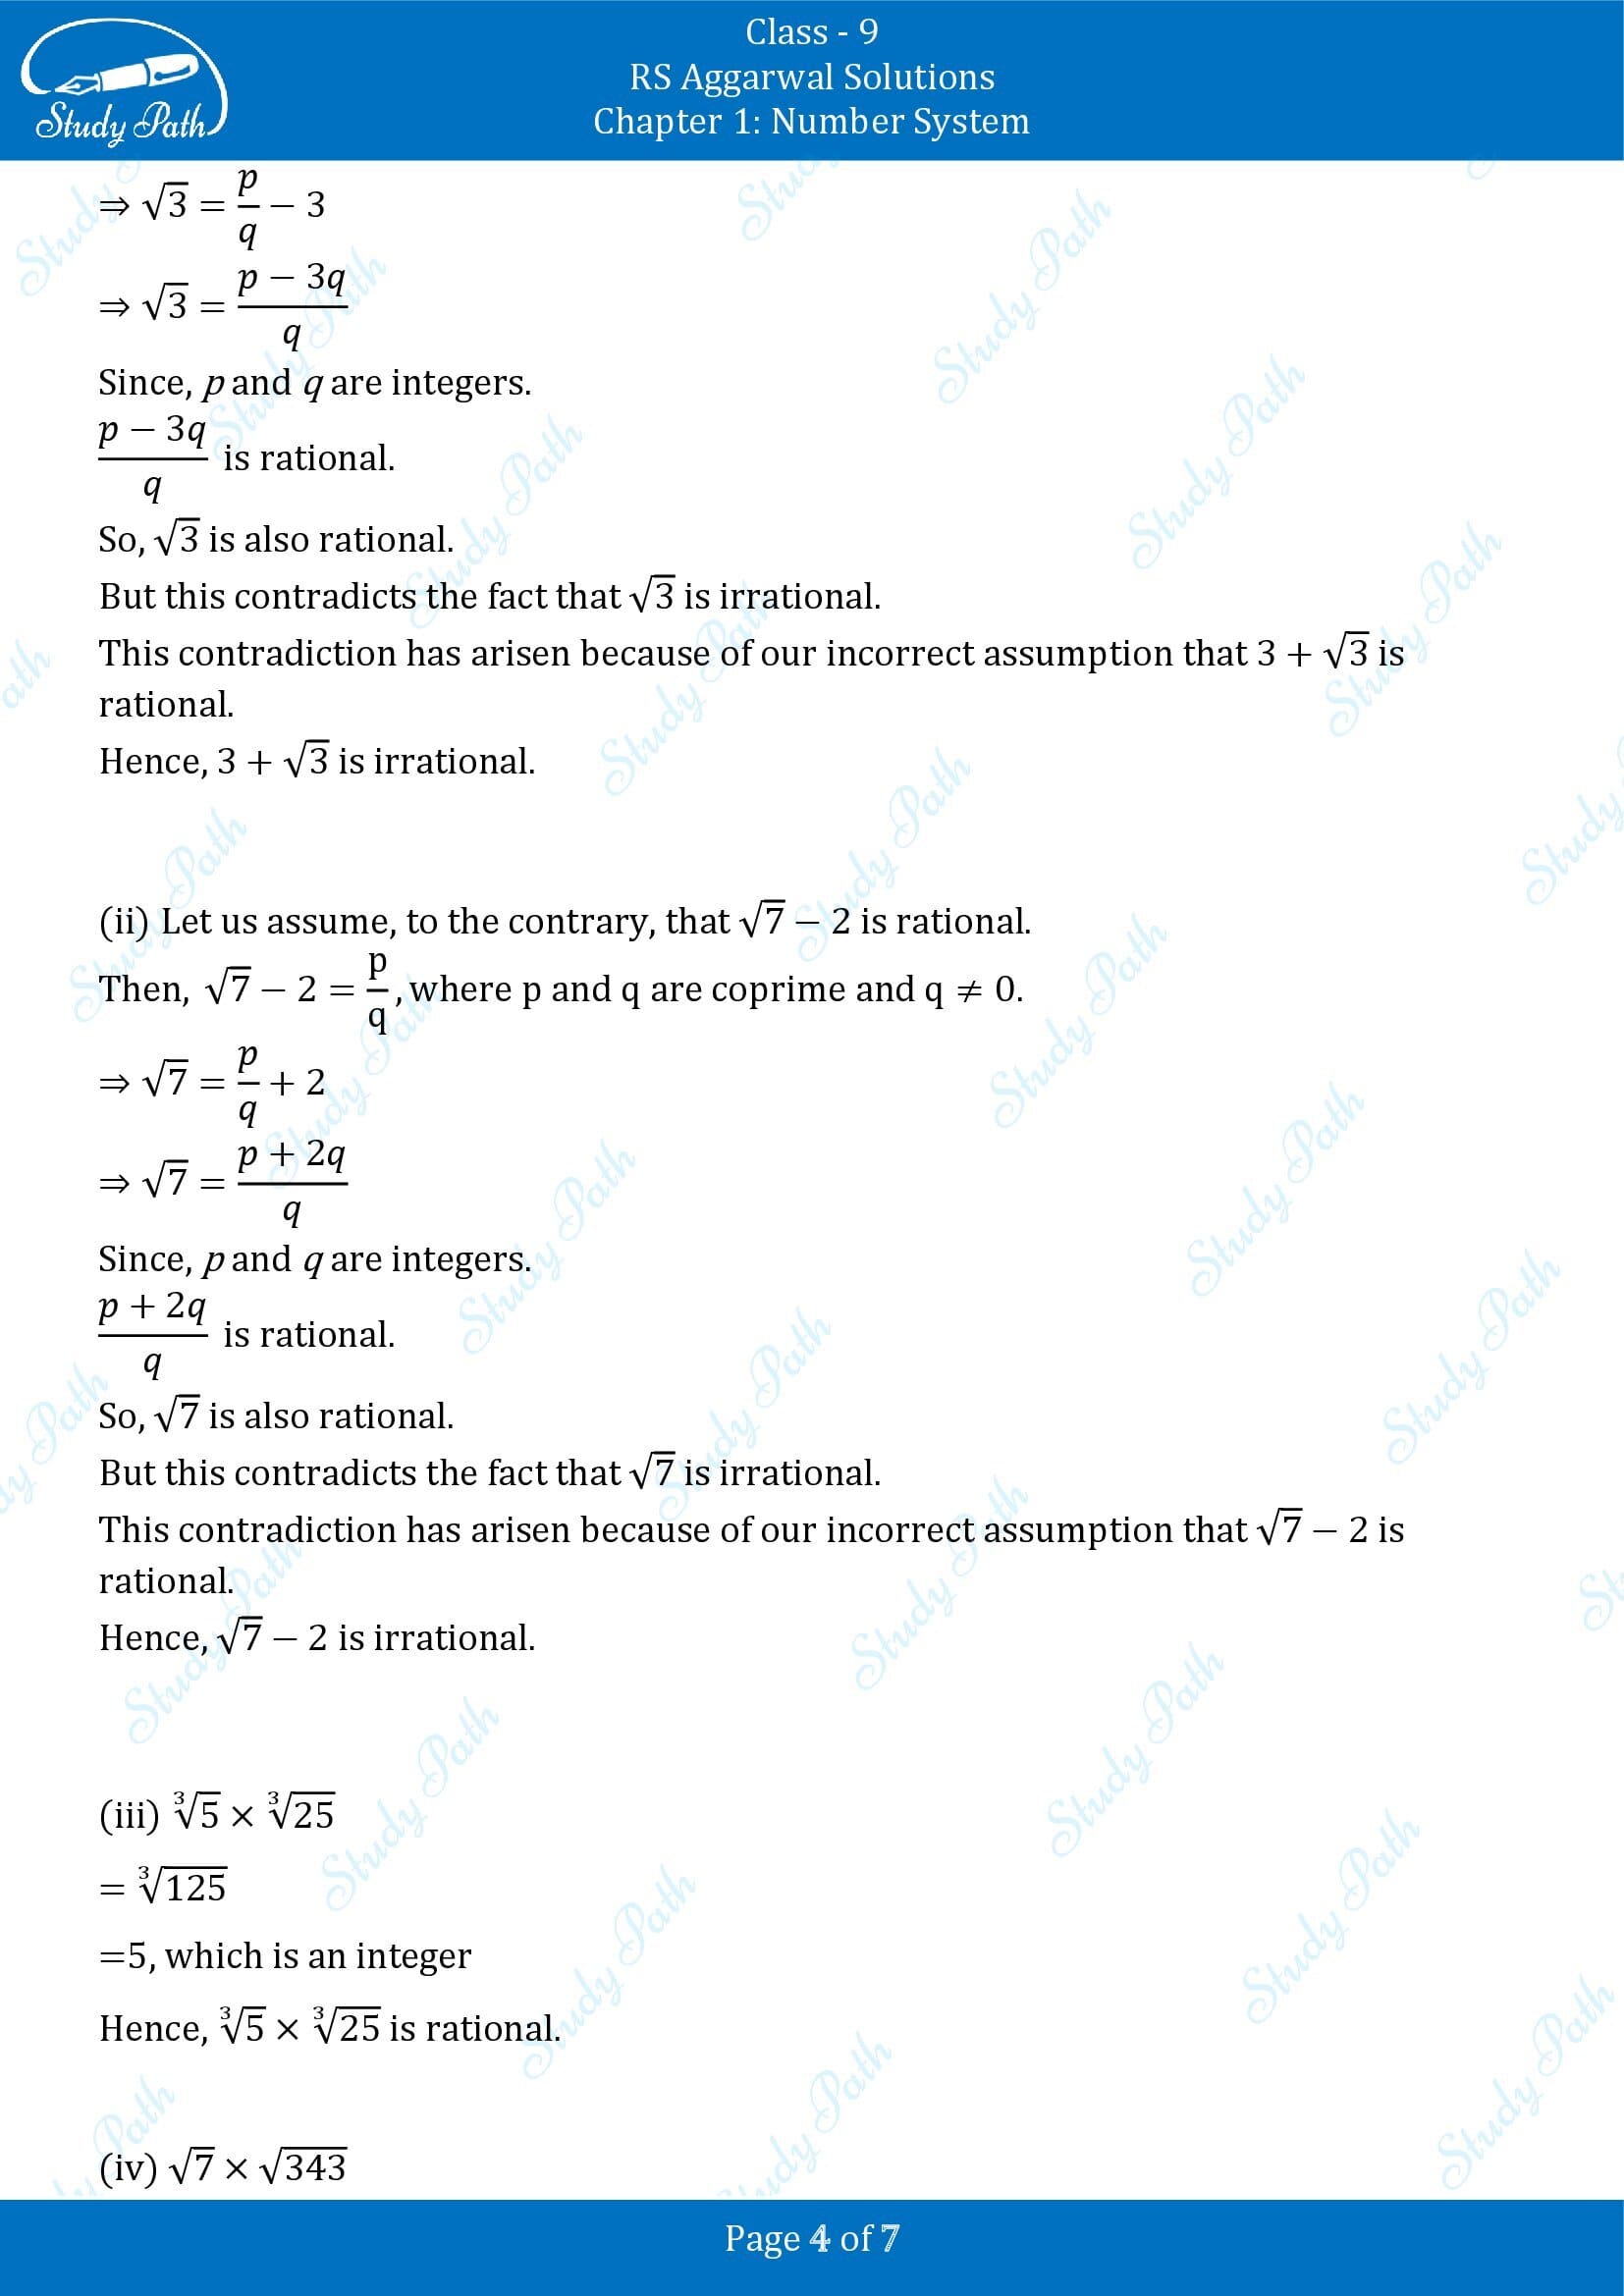 RS Aggarwal Solutions Class 9 Chapter 1 Number System Exercise 1C 00004